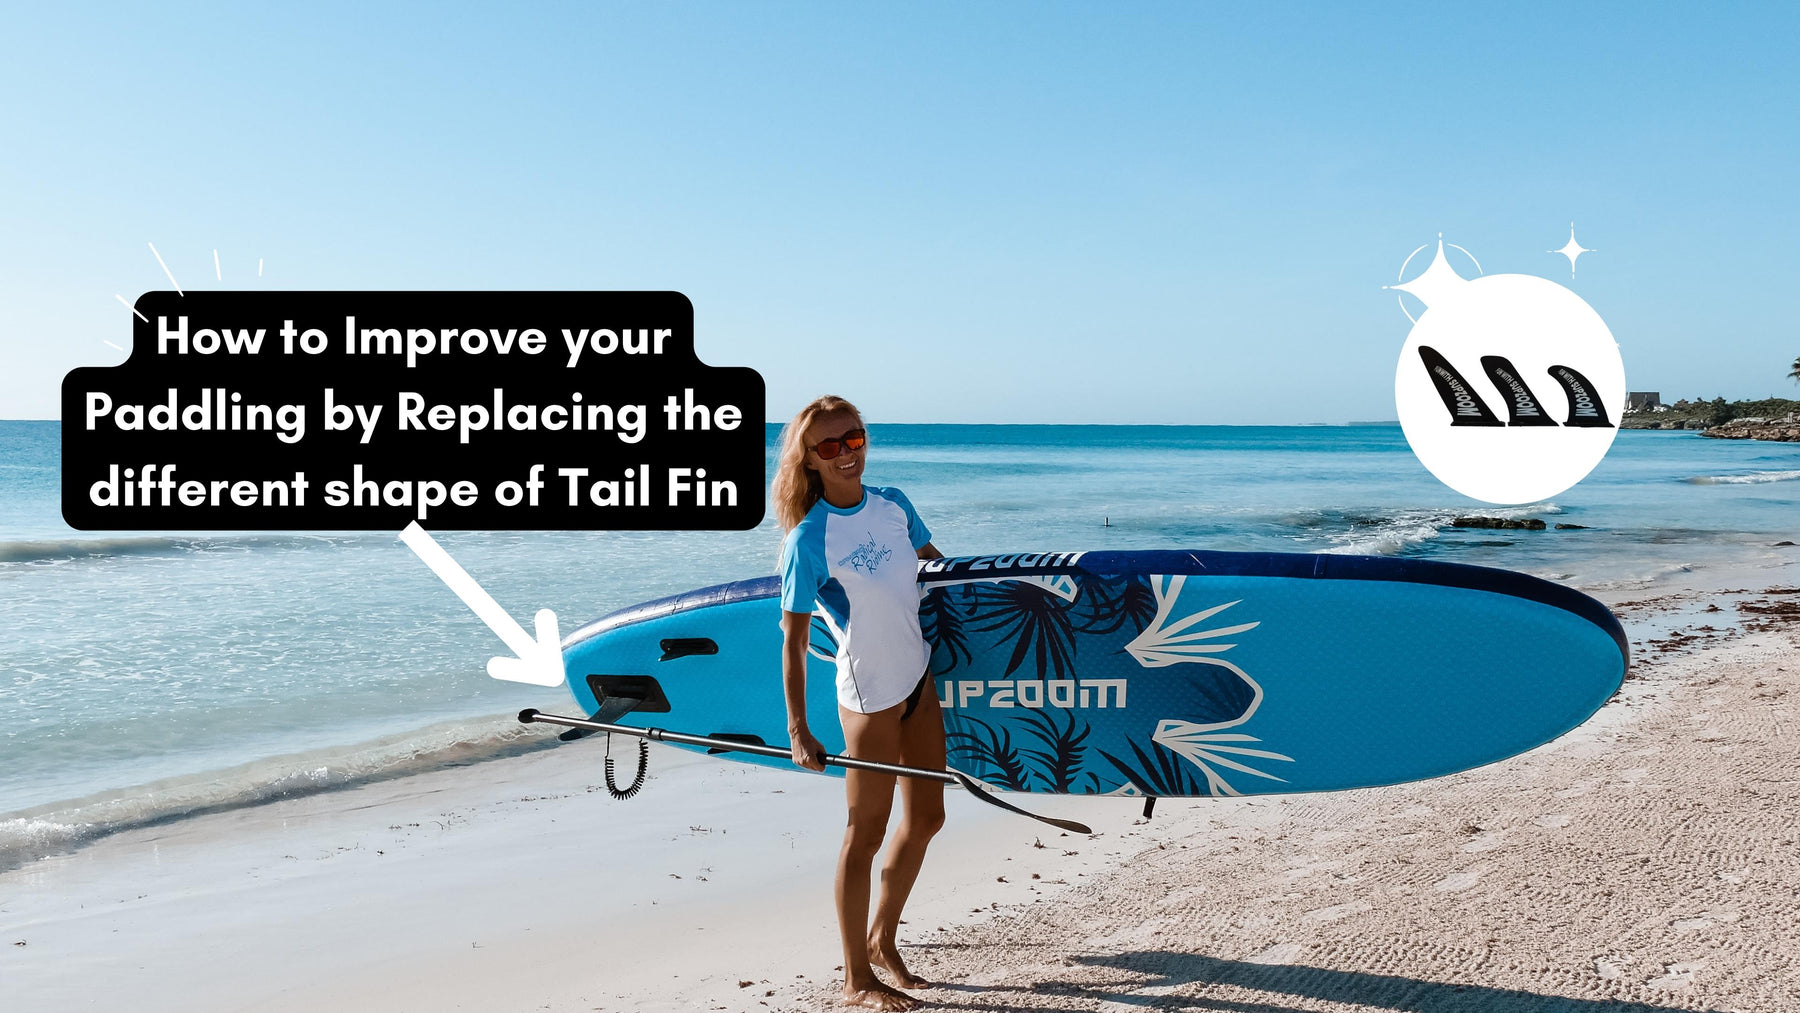 How to Improve your Paddling by Replacing the different shape of Tail Fin